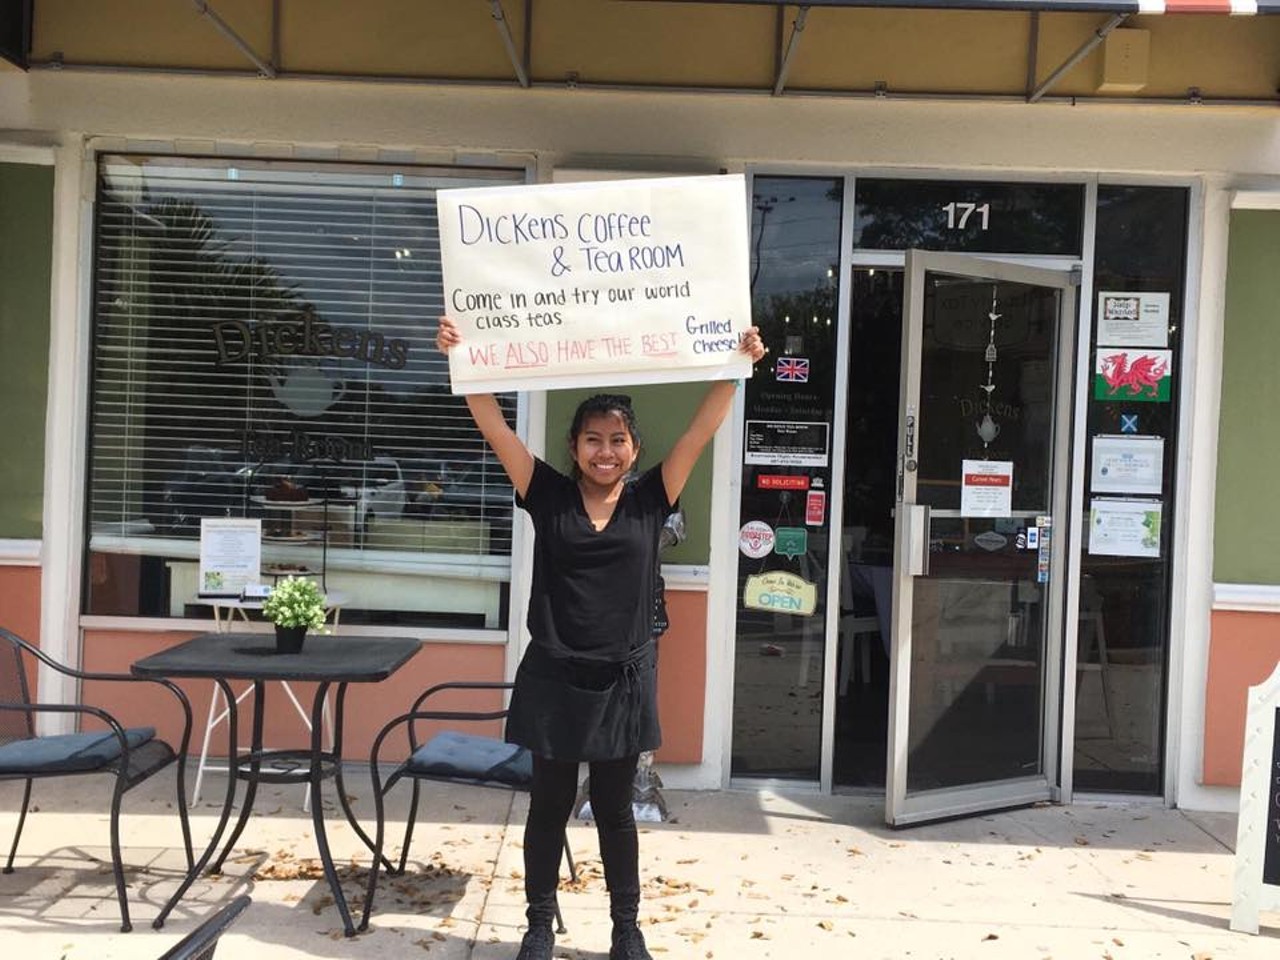 Dickens Coffee and Tea House 
3801 W. Lake Mary Blvd Ste 171 Lake Mary, Florida 32746, PHONE
They offer tea, petite tea sandwiches, delicious desserts with outdoor seating for you and your pets. 
Photo via Dickens Coffee and Tea House/Facebook